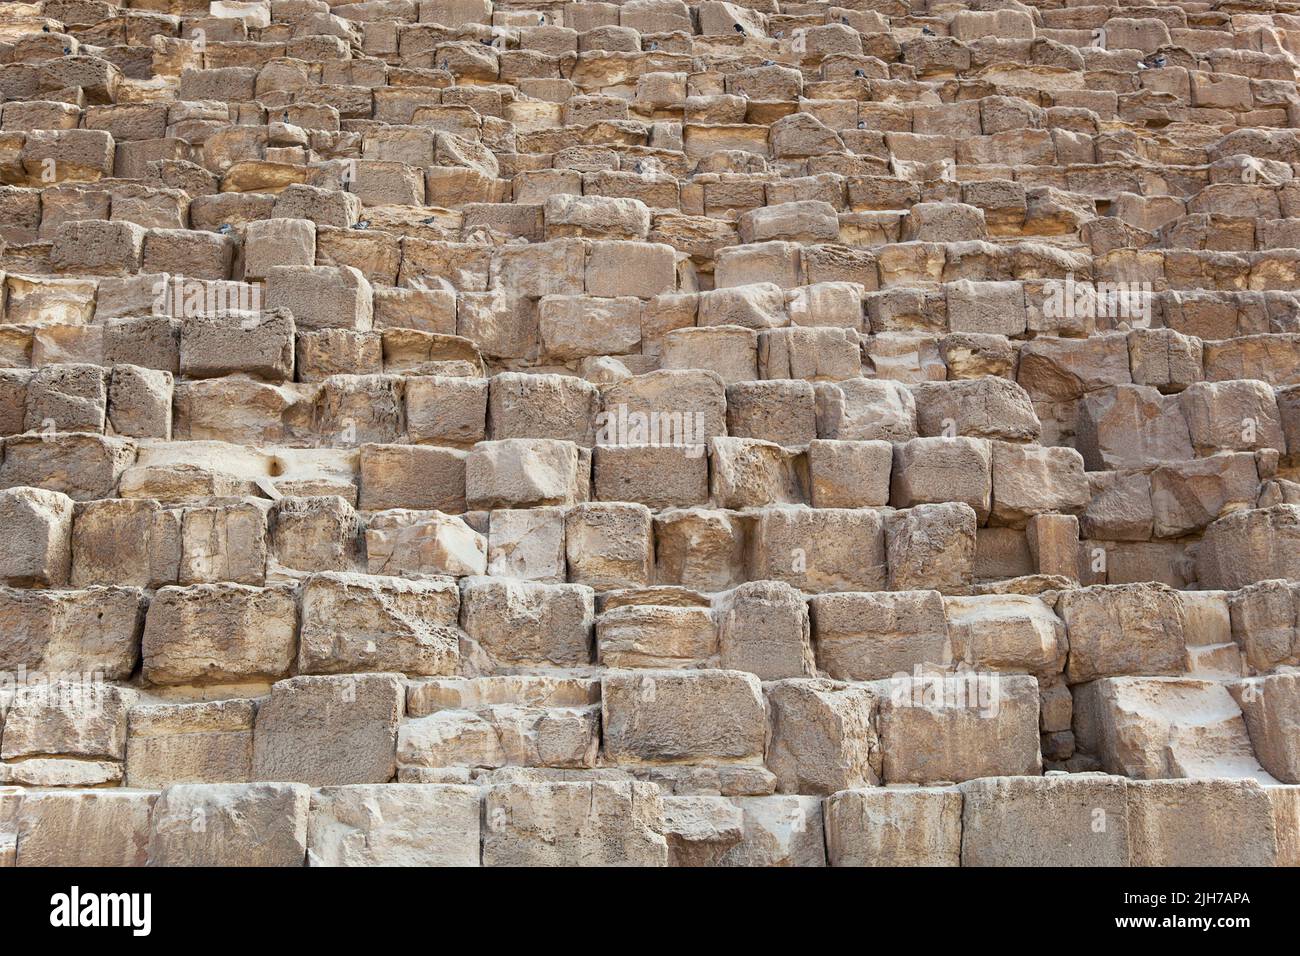 Detail of the stonework of one of the Pyramids of Giza, Egypt. Stock Photo